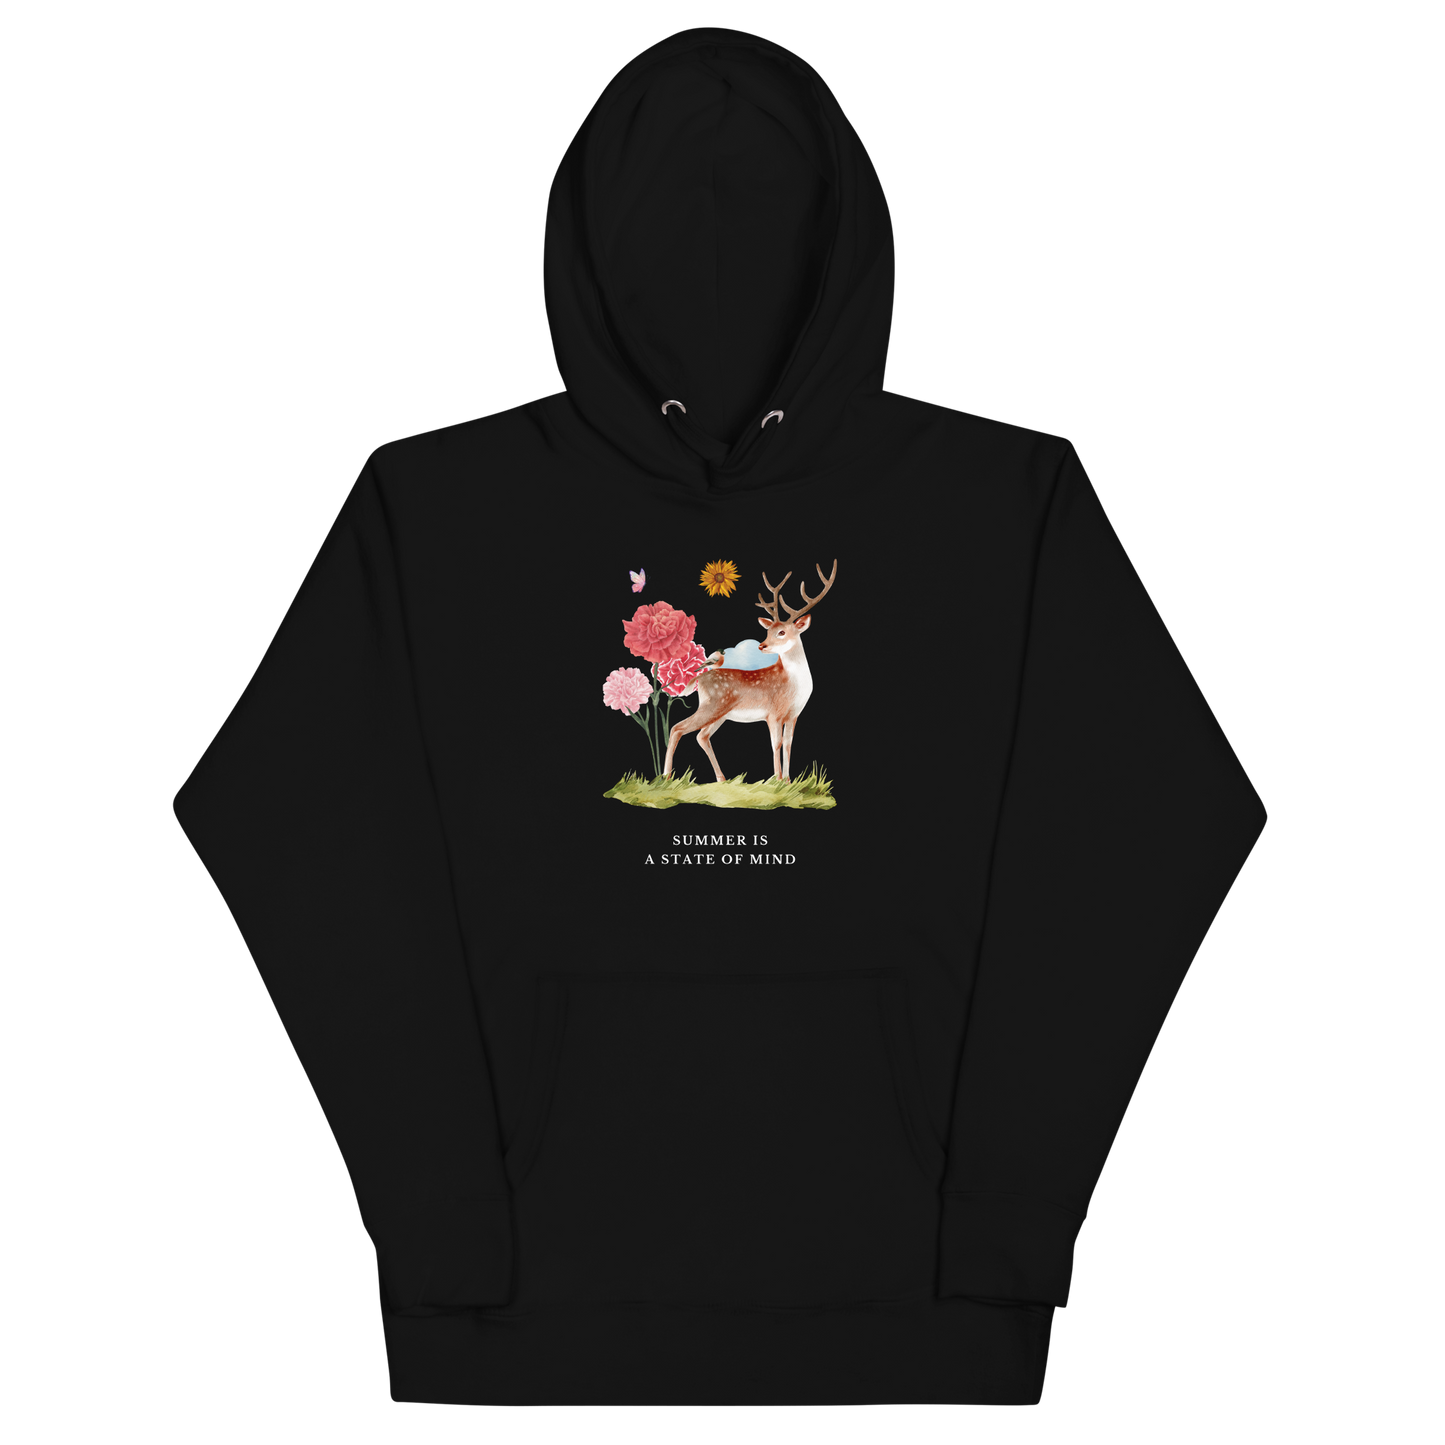 Black Premium Summer Is a State of Mind Hoodie showcasing a Summer Is a State of Mind graphic on the chest - Cute Graphic Summer Hoodies - Boozy Fox